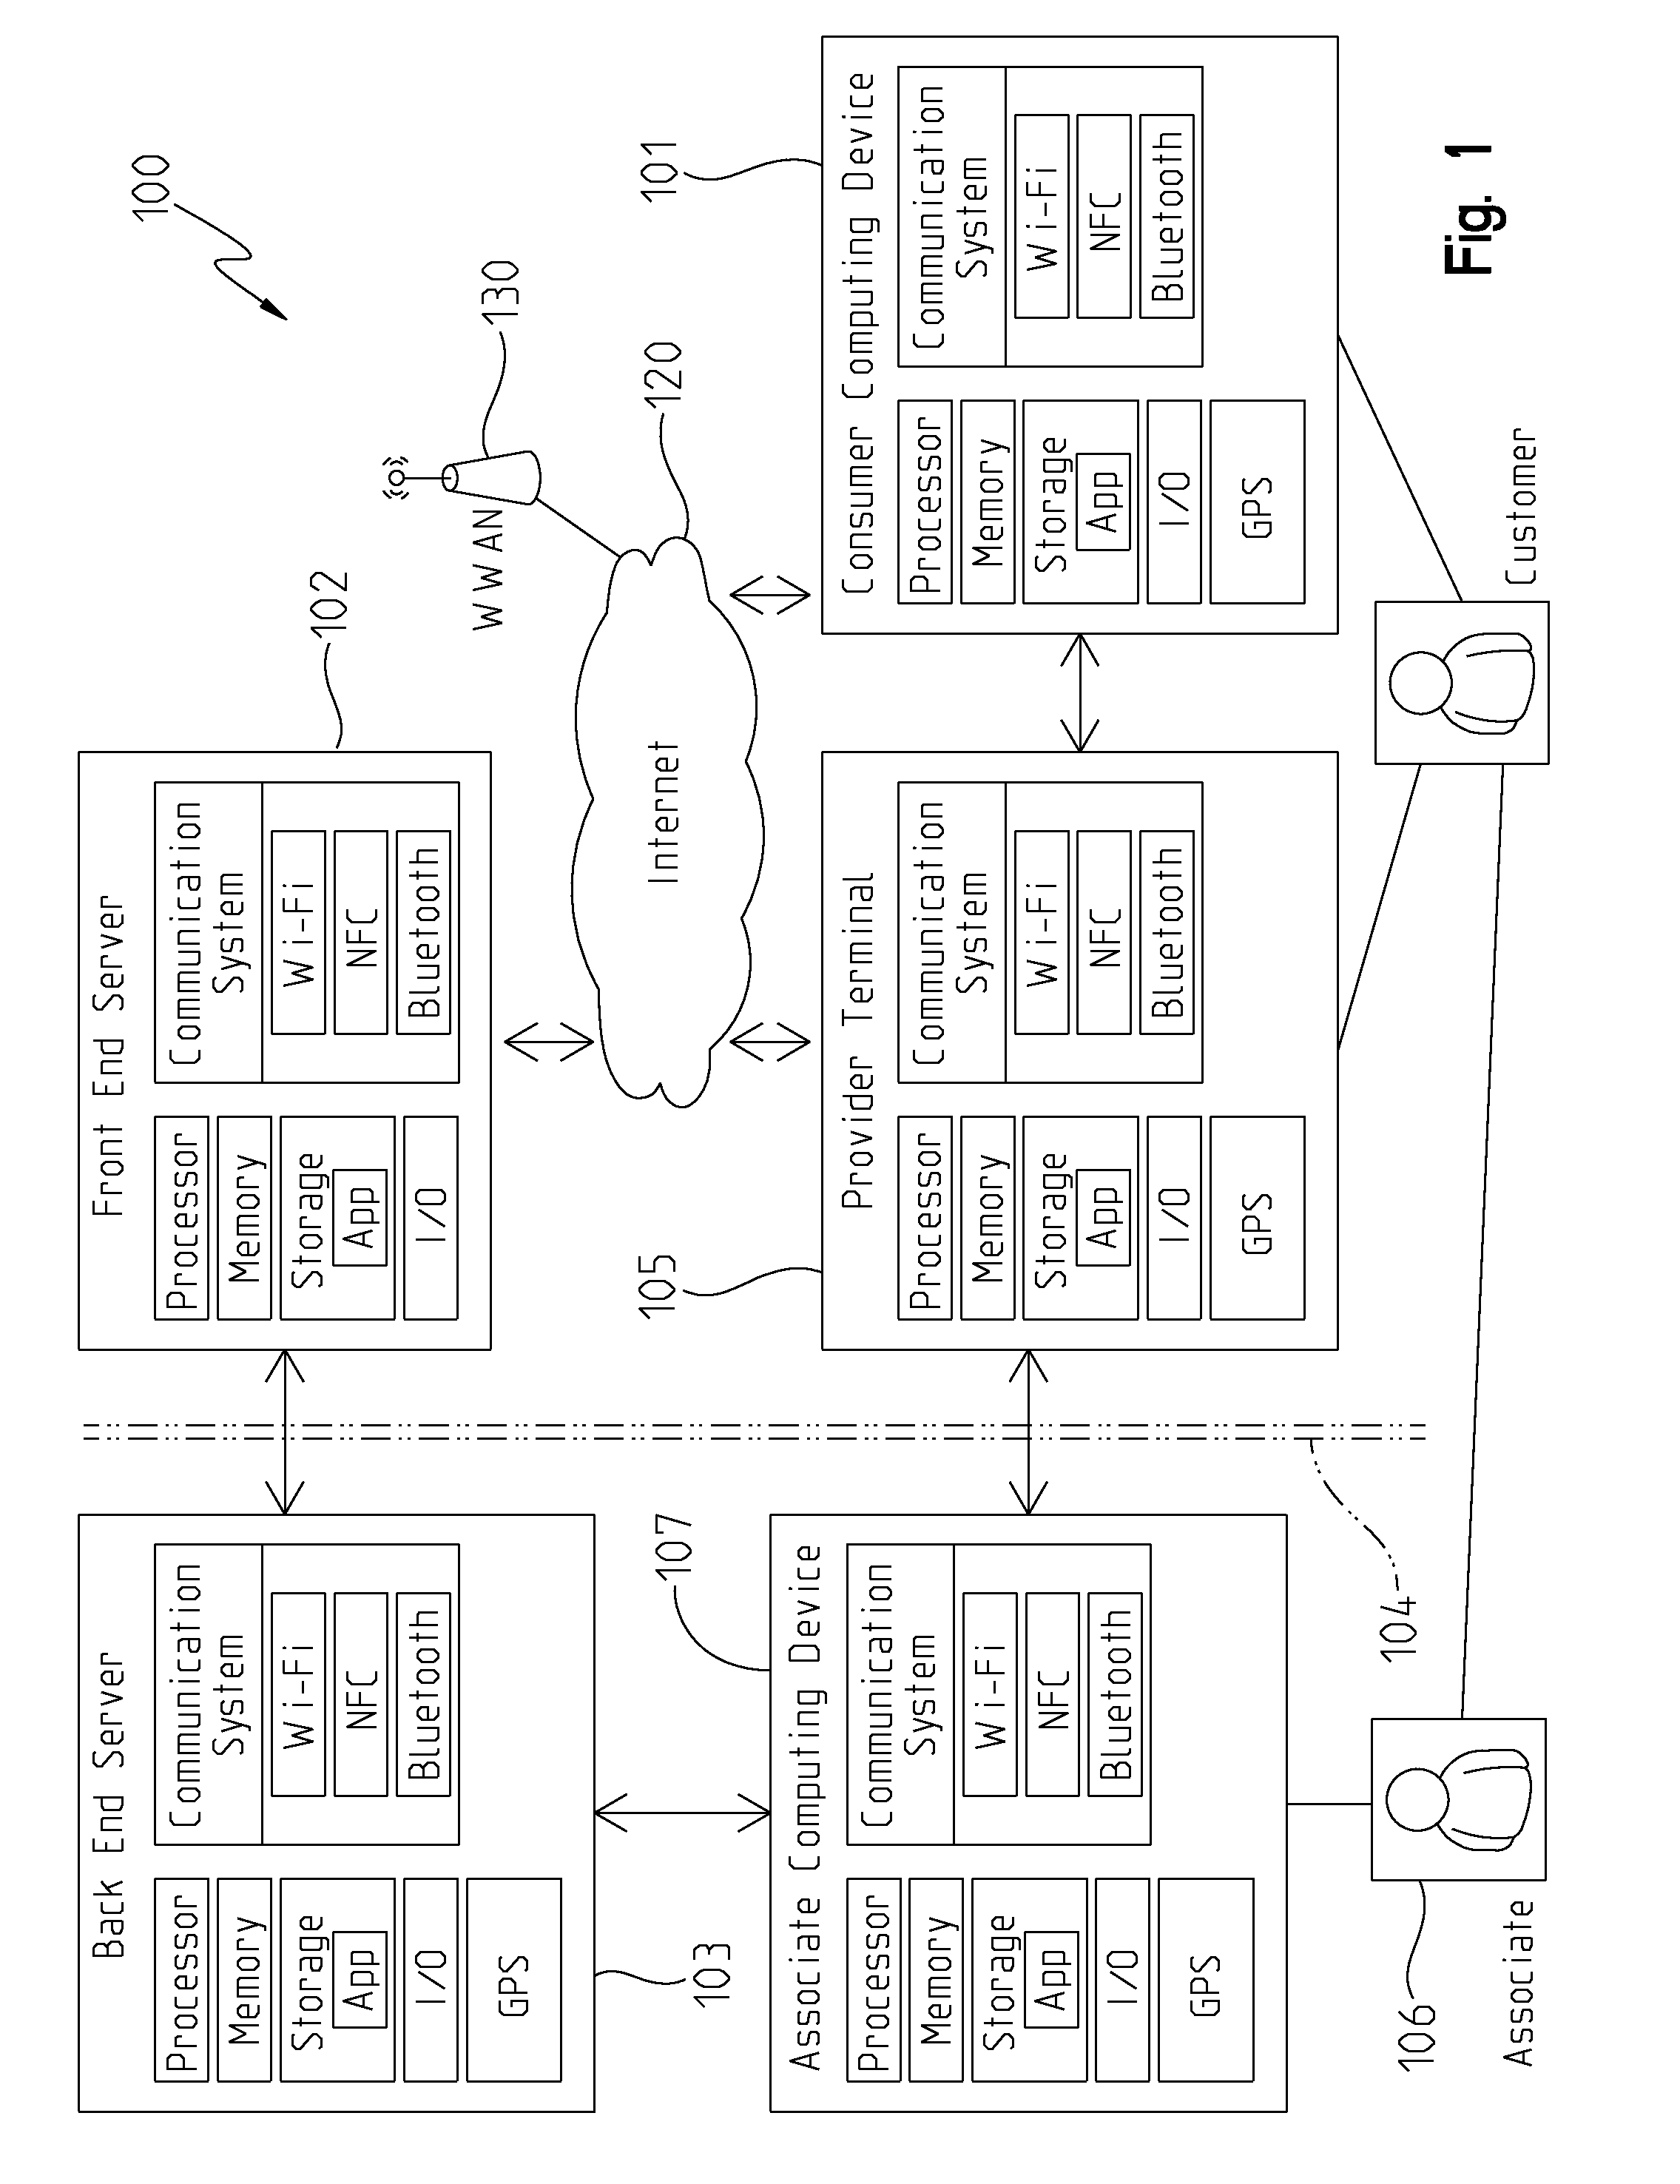 System and method for enforcing data integrity and loan approval automation by means of data aggregation and analysis